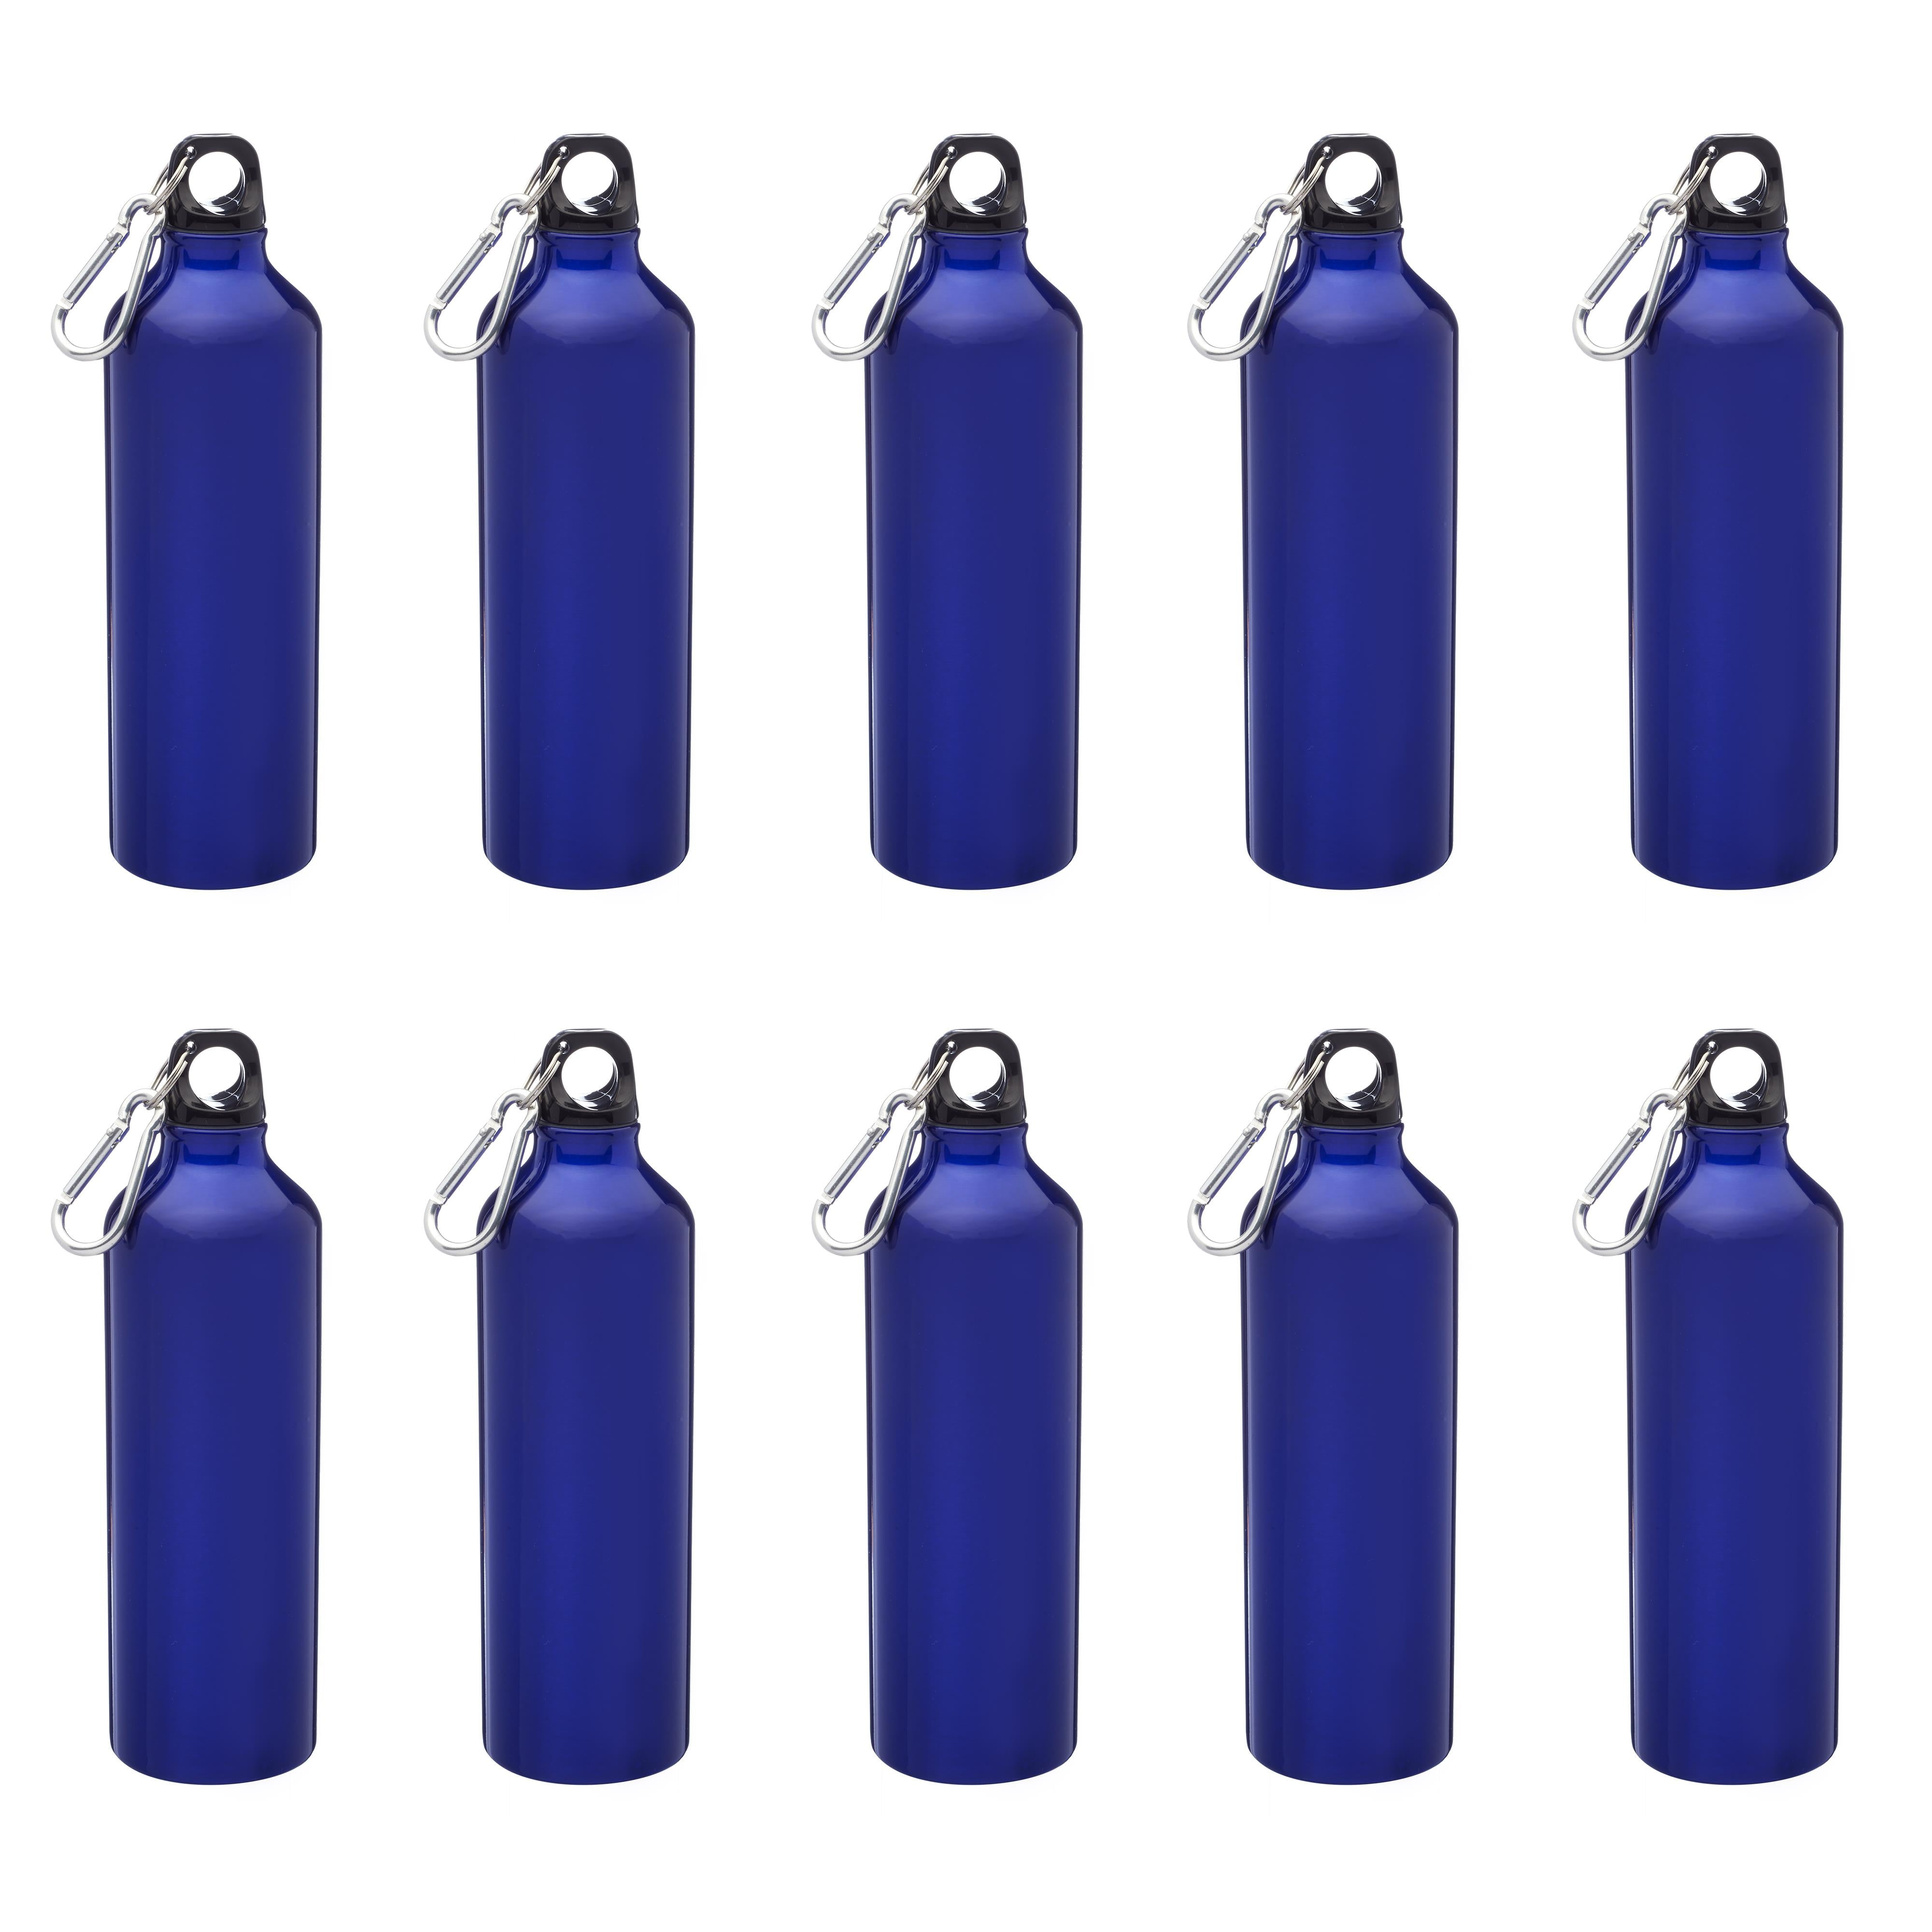  DISCOUNT PROMOS Bullet Shape Stainless Steel Water Bottles 26  oz. Set of 10, Bulk Pack - Leak Proof, With Carabiner, Leak Proof, Perfect  for Gym, Hiking, Camping, Outdoor Sports - Silver 